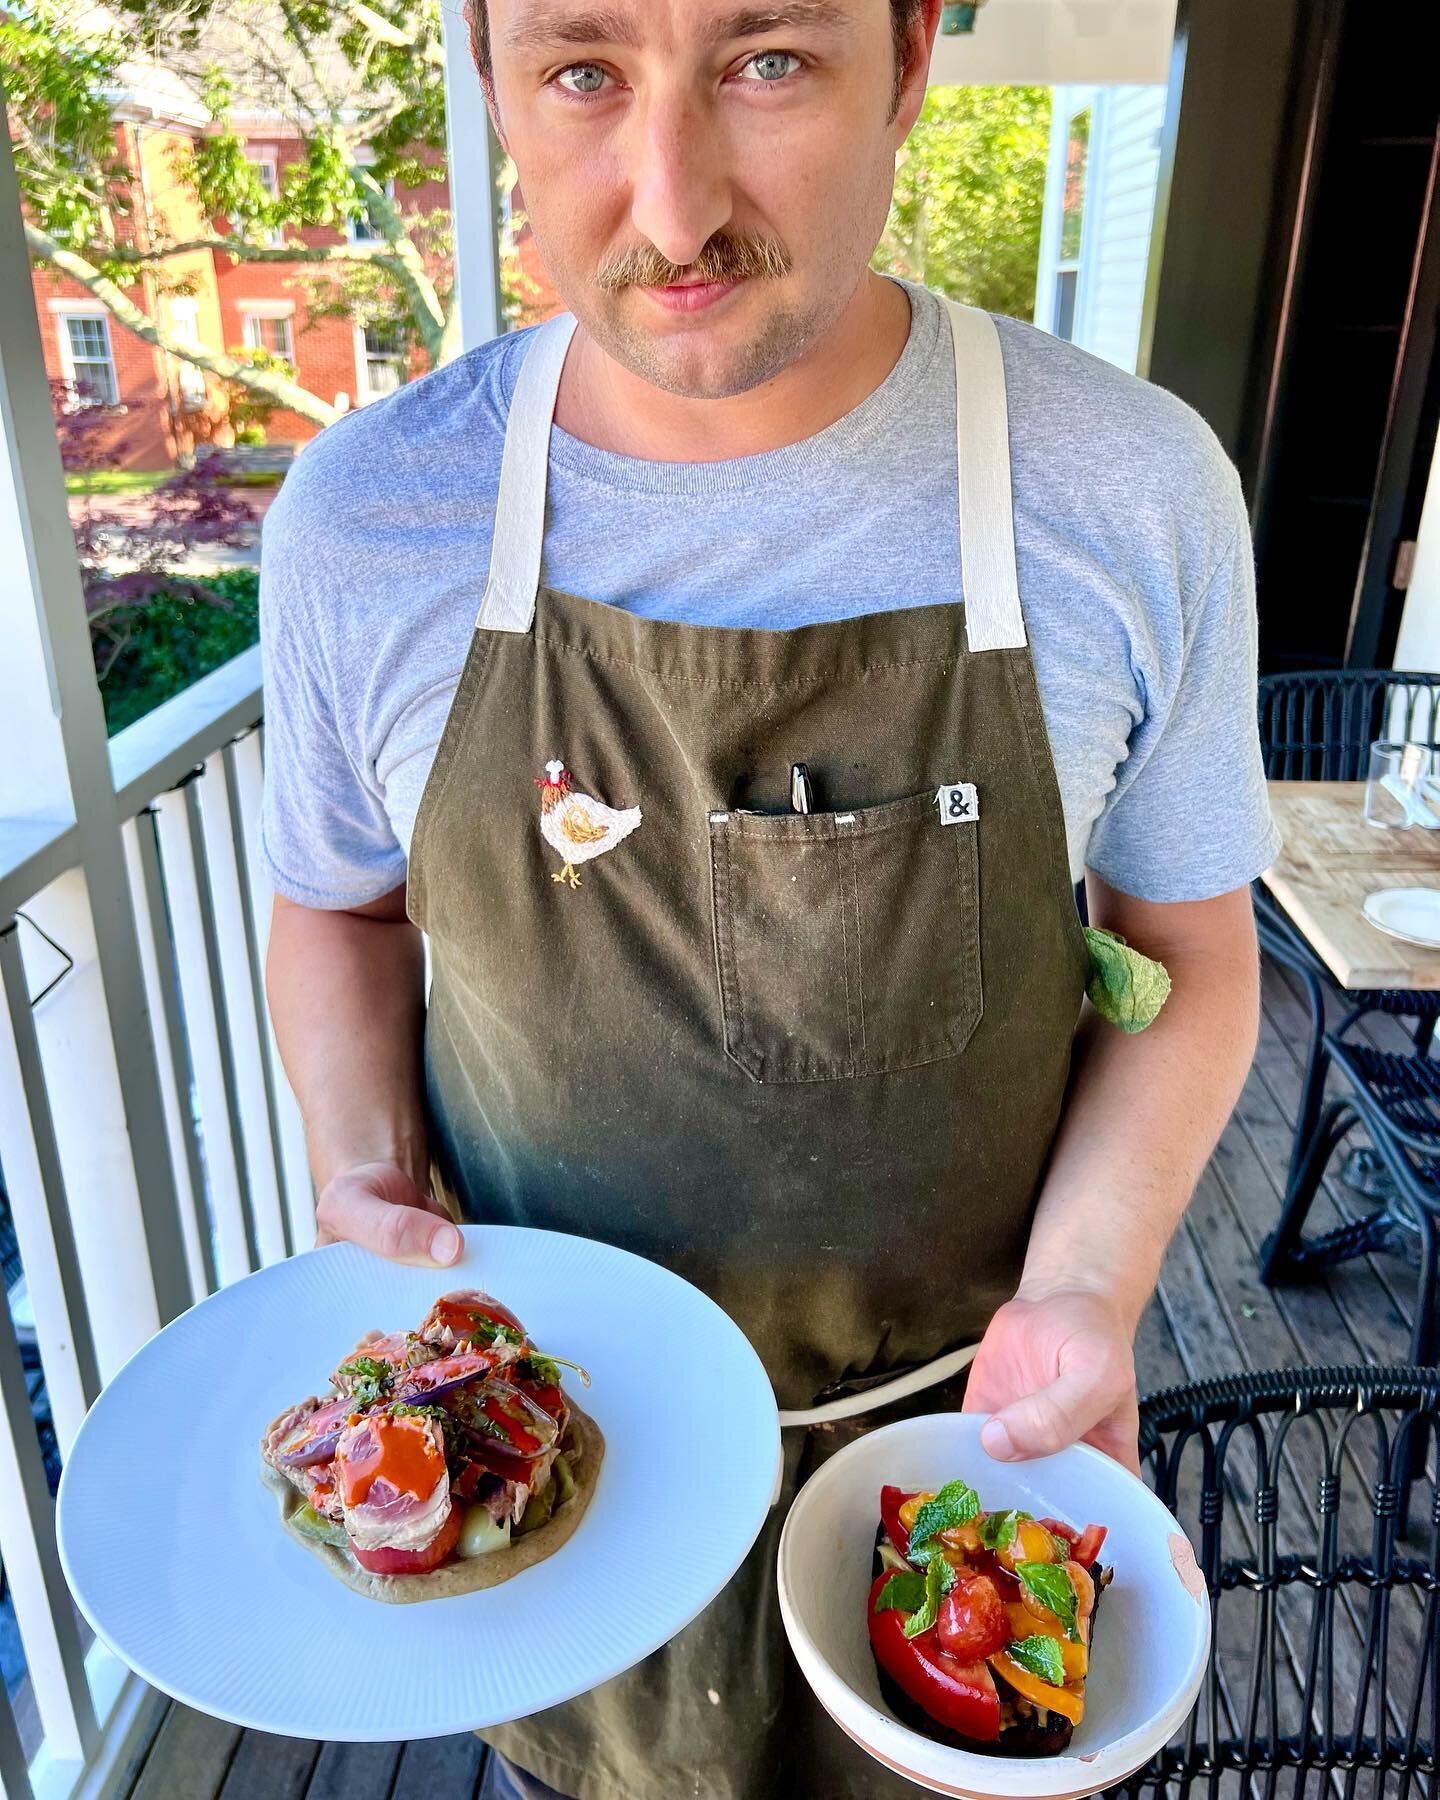 @scott_fiore takes his tuna &amp; tomato toasts very very seriously! &hellip;with good reason!  silly people serving serious eats starting at 5:30 tonight! 🍅 🍅 🍅 
.
.
.
#nantucket #ack #local #tuna #tomatoseason #localfood #eeeeeats #italian #ital